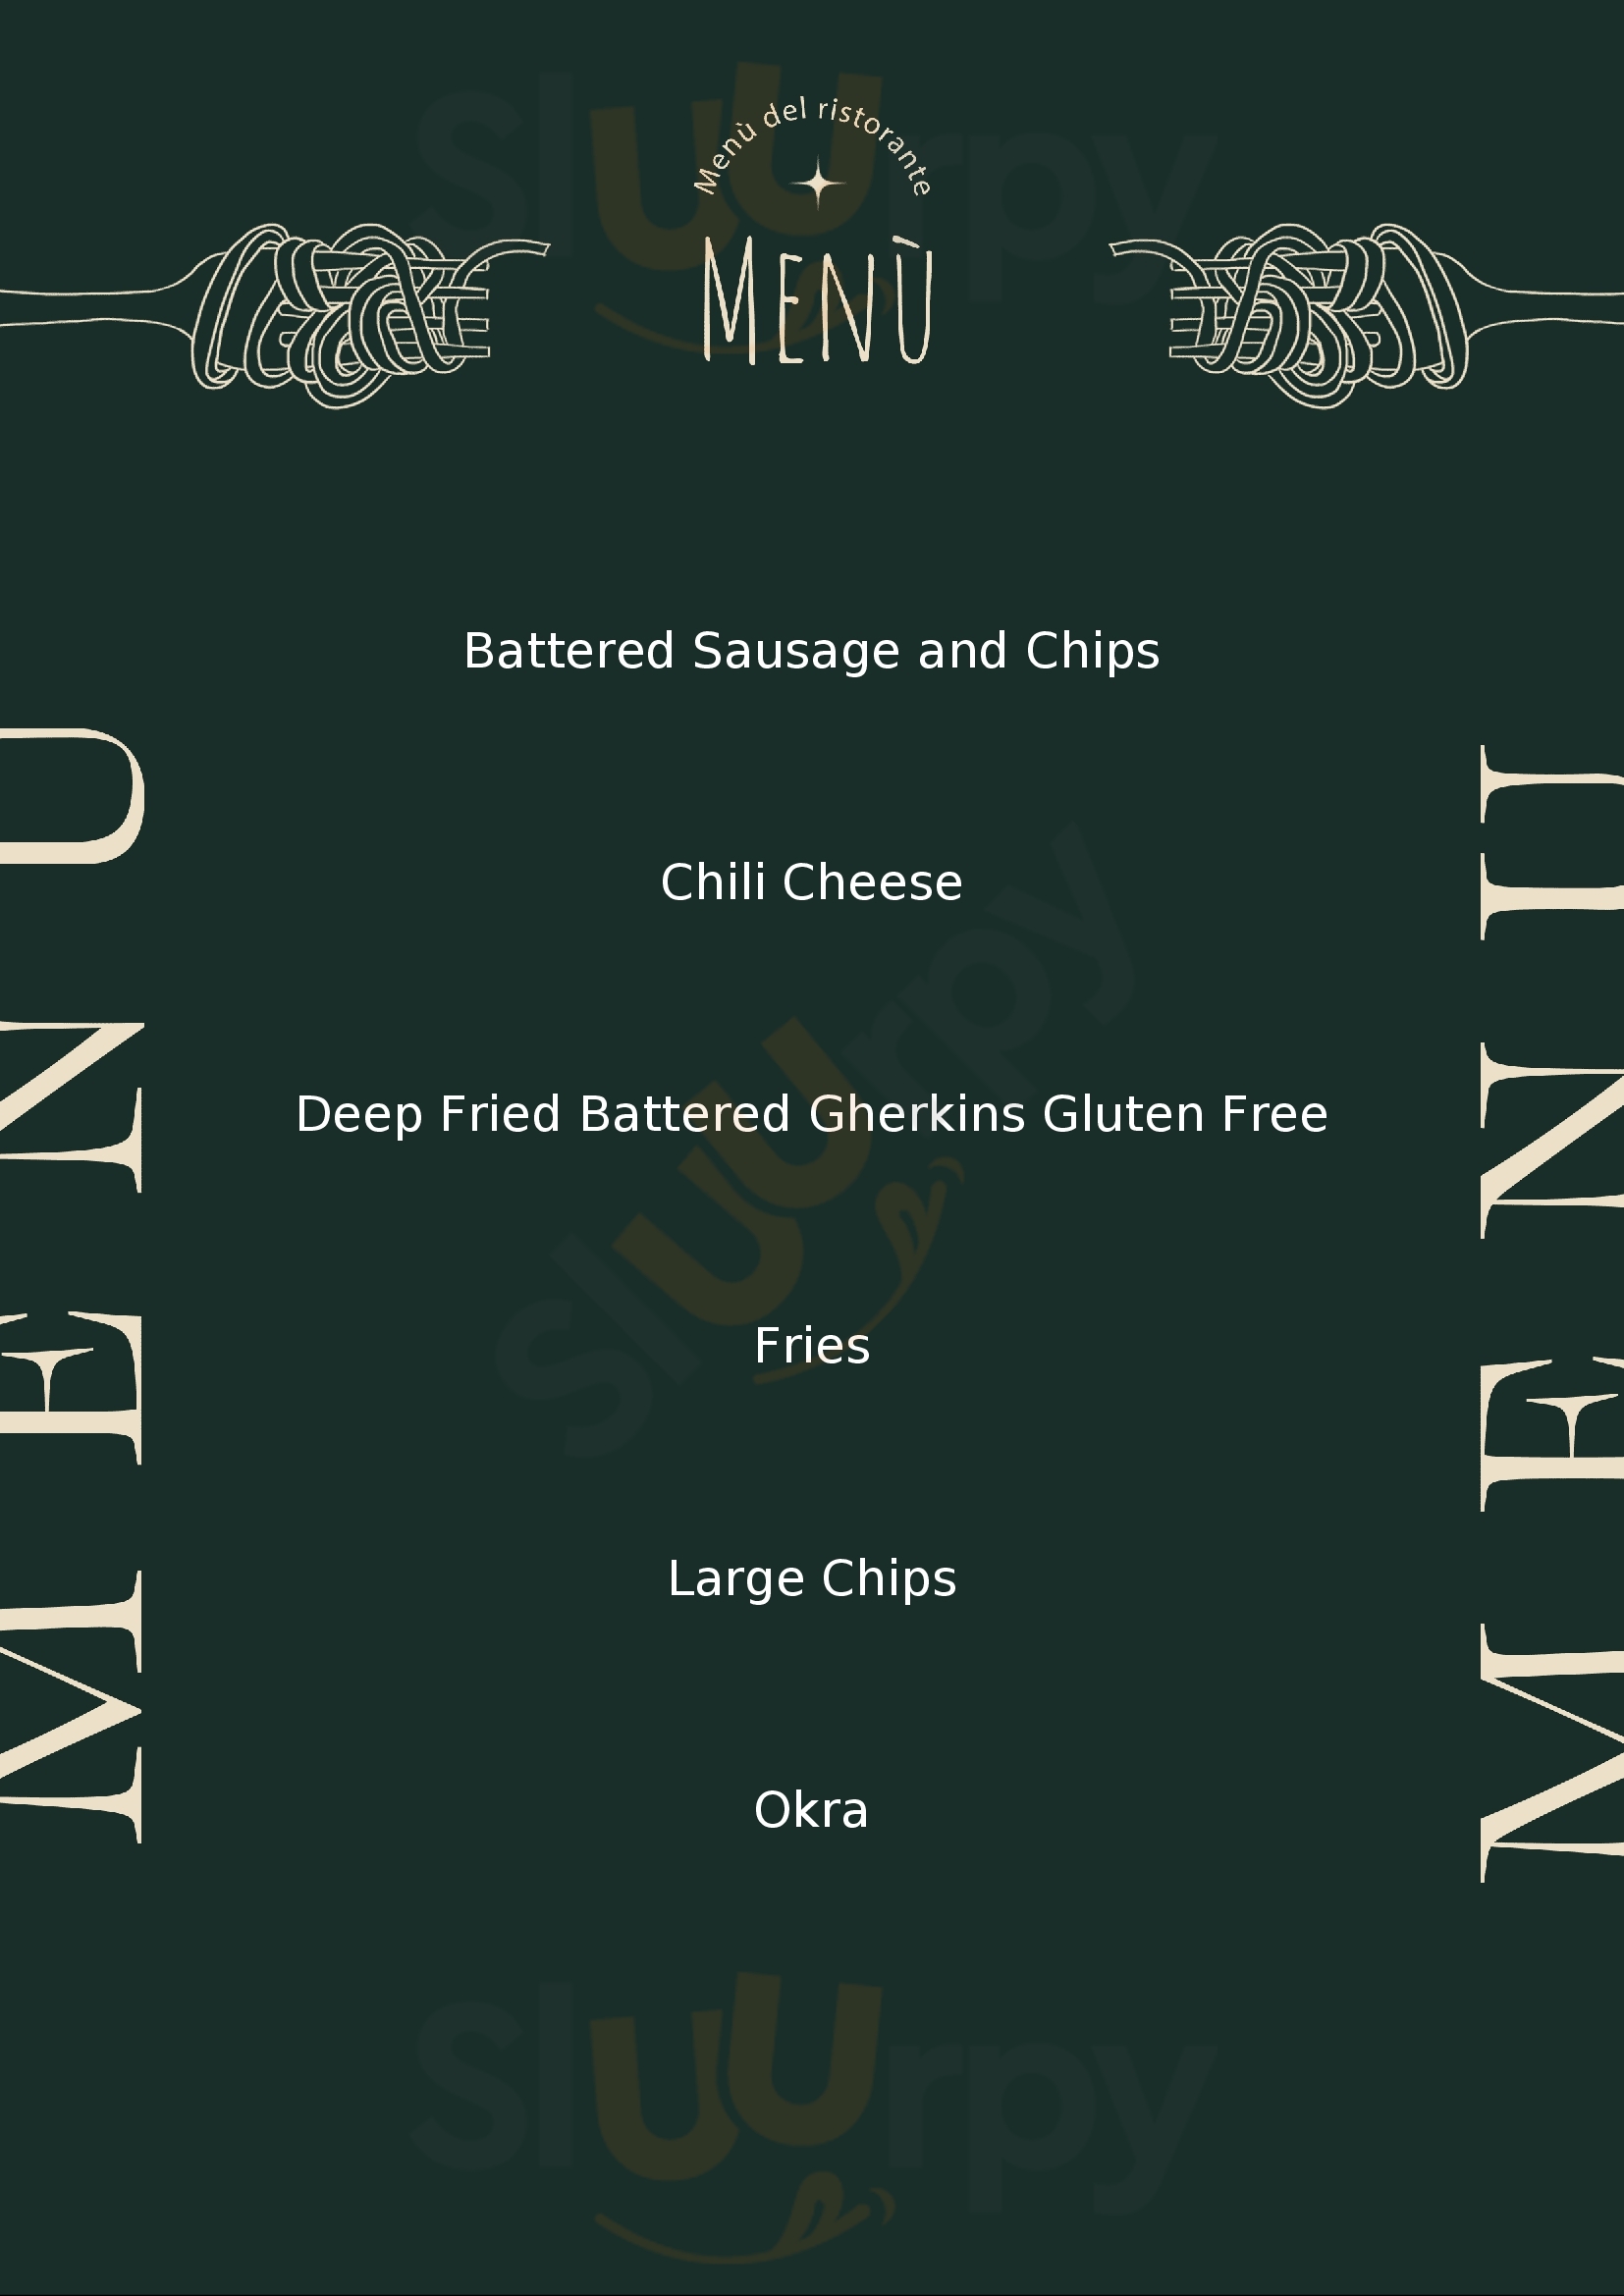 Lucy's Chip Stall Norwich Menu - 1